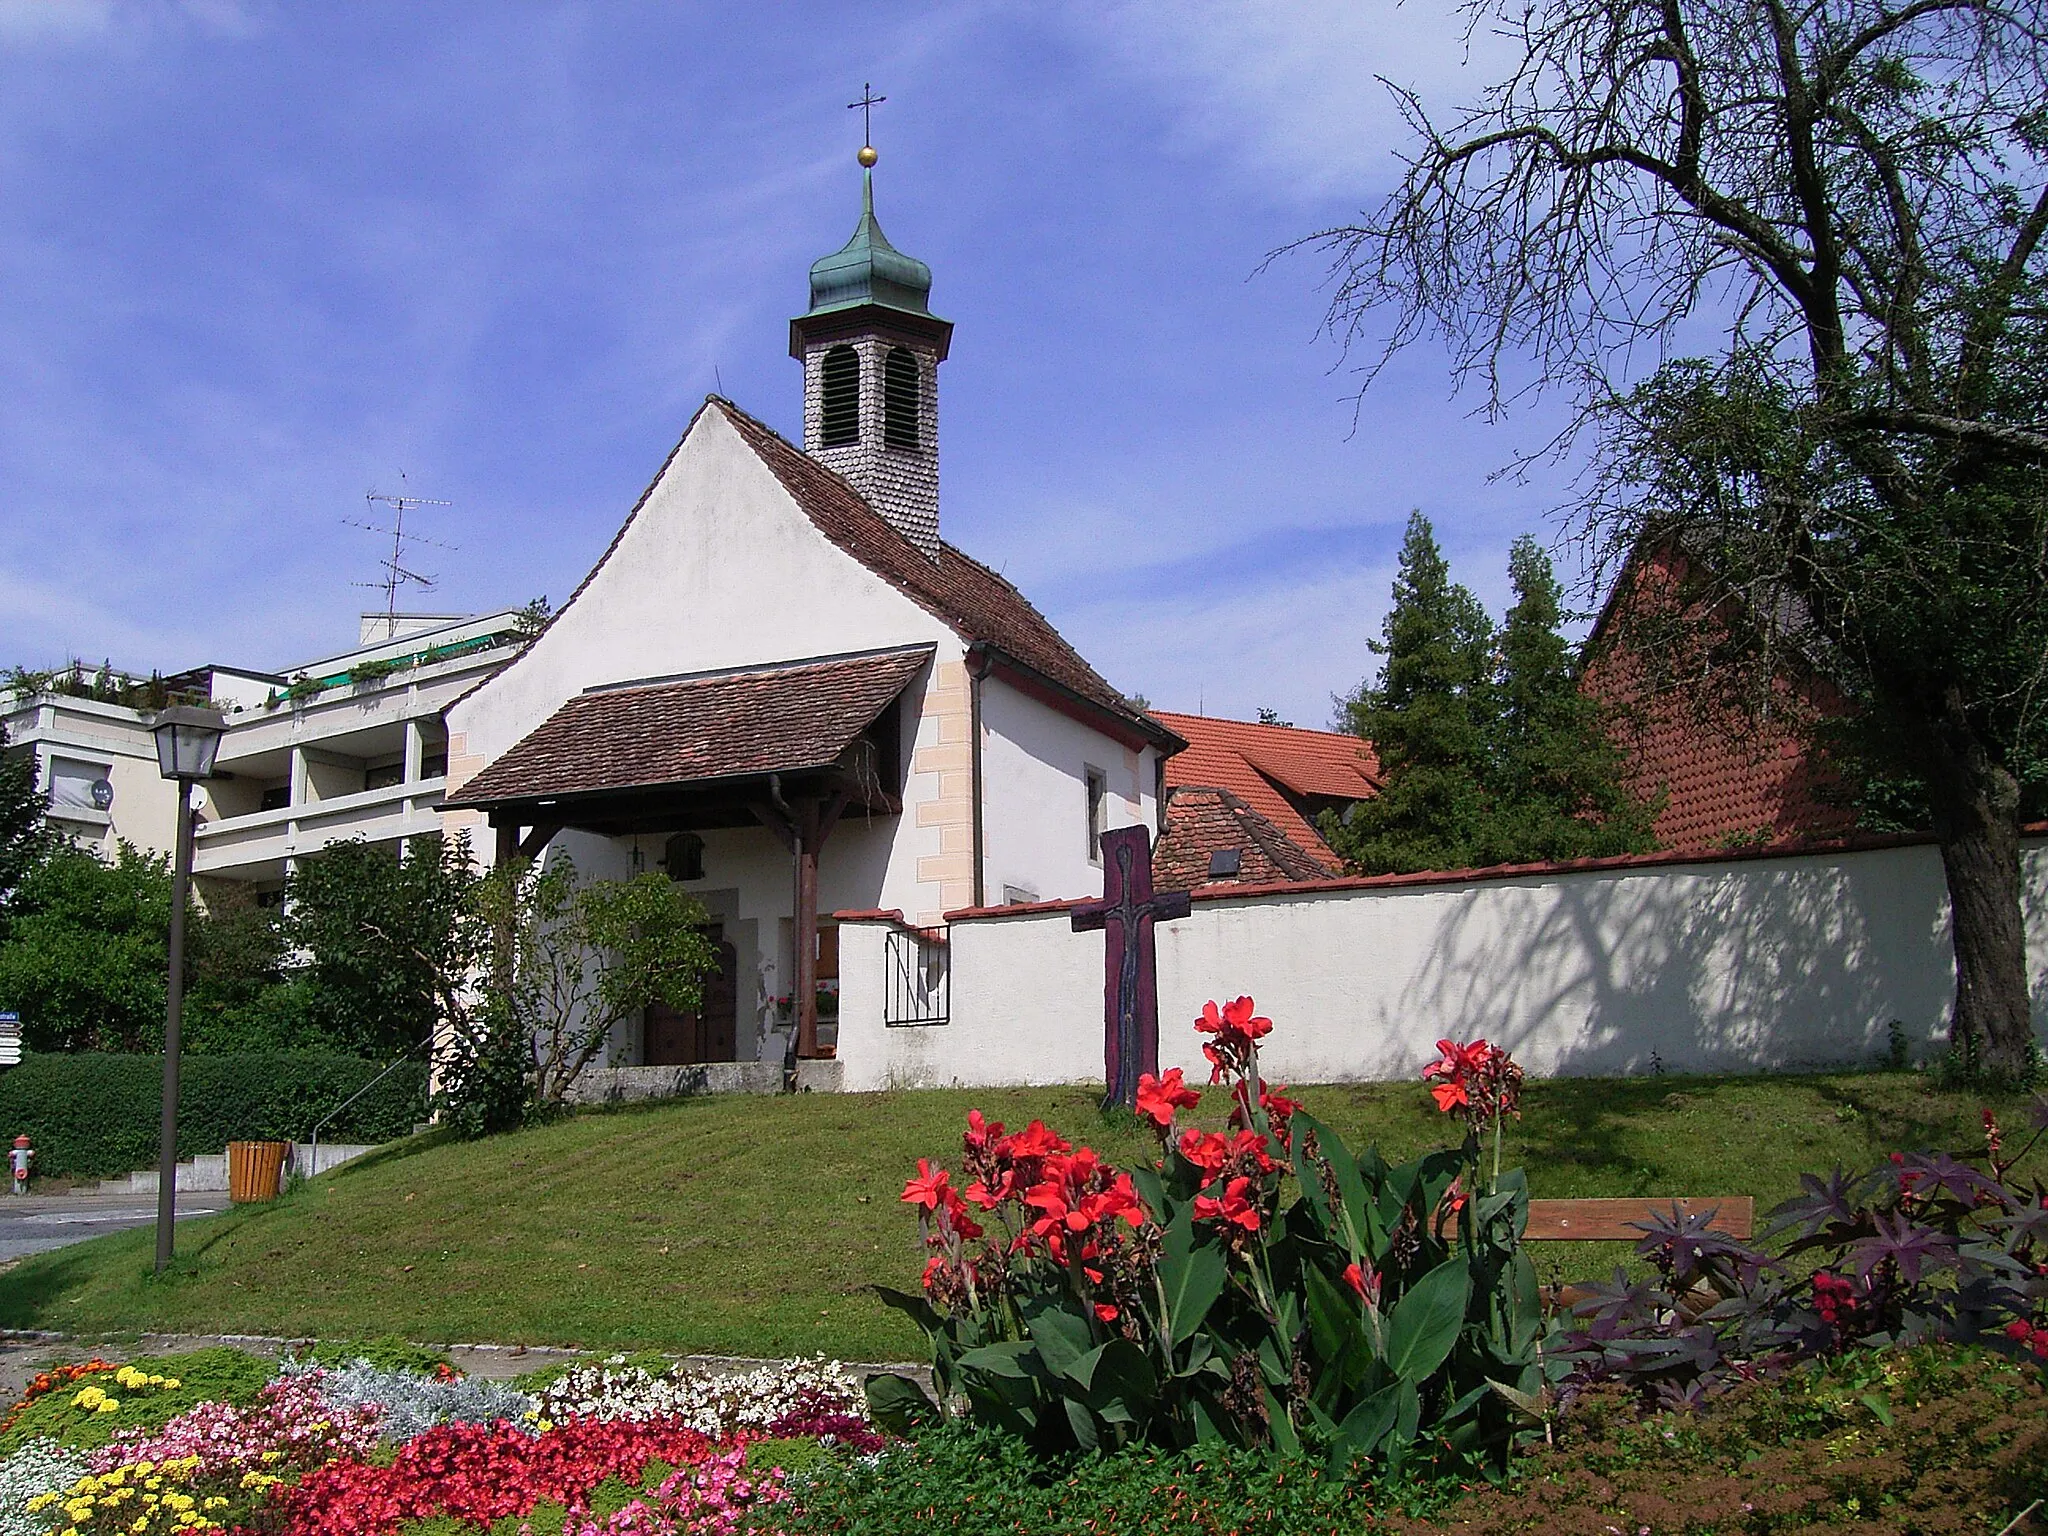 Photo showing: A Chappell named "St. Martin" located in Daisendorf, Germany